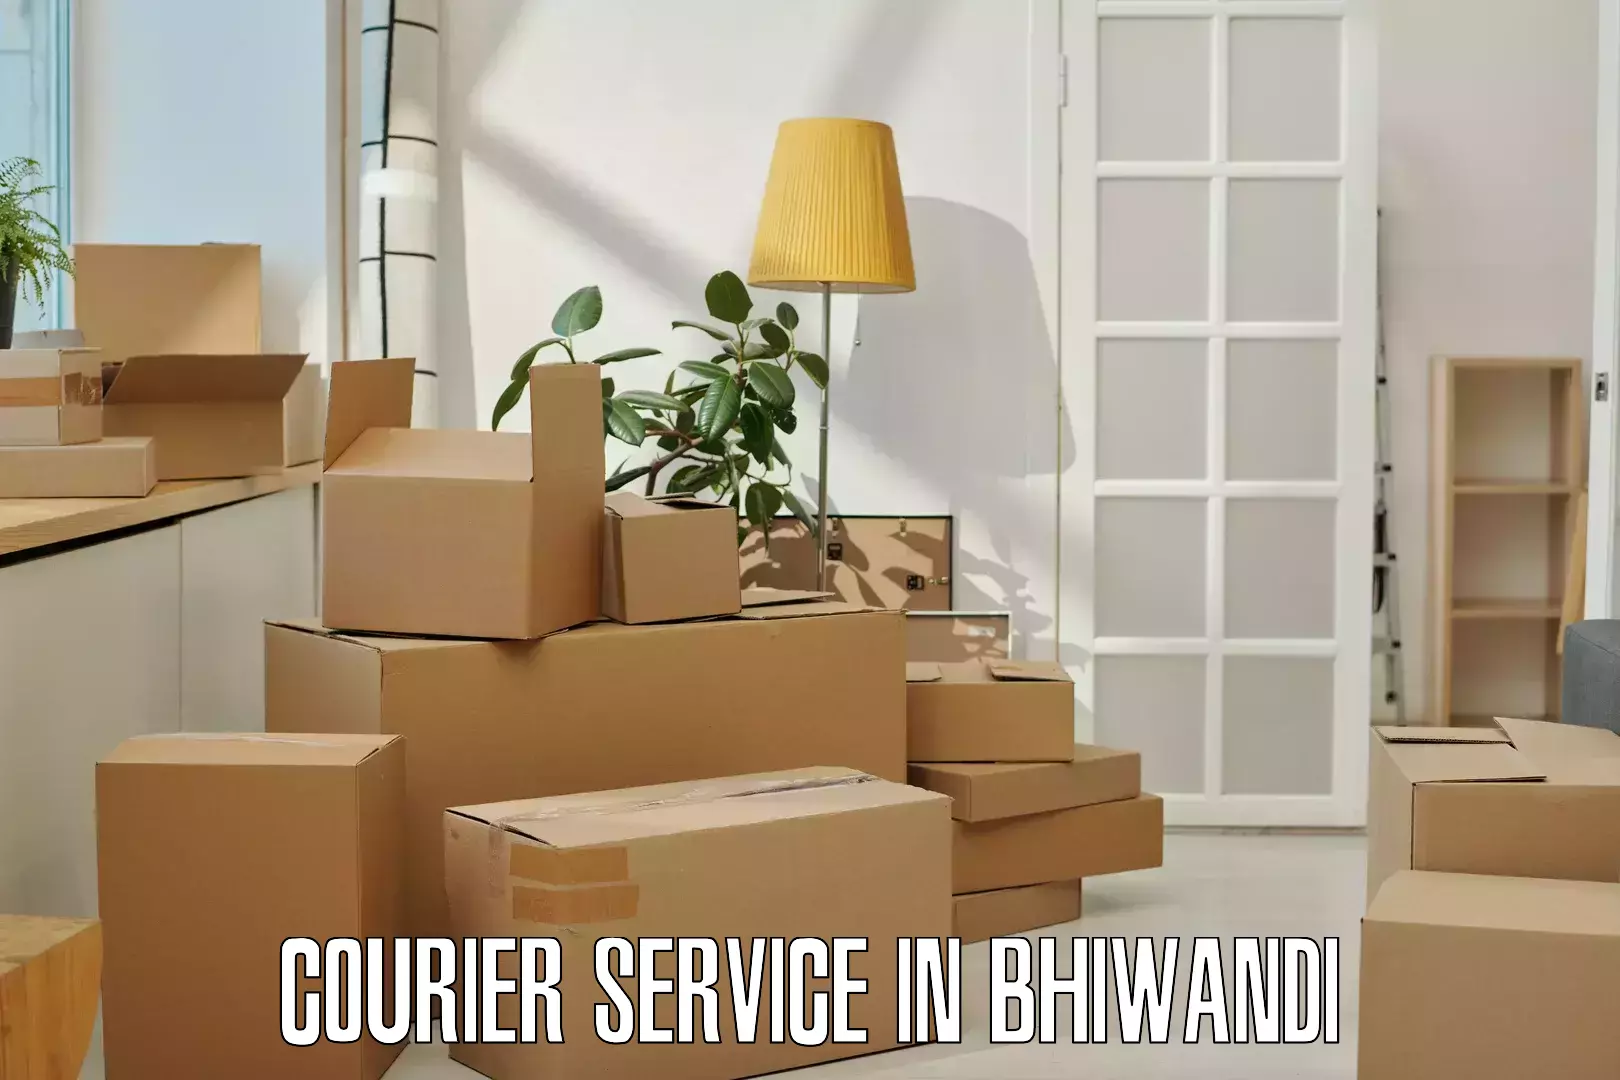 Air courier services in Bhiwandi